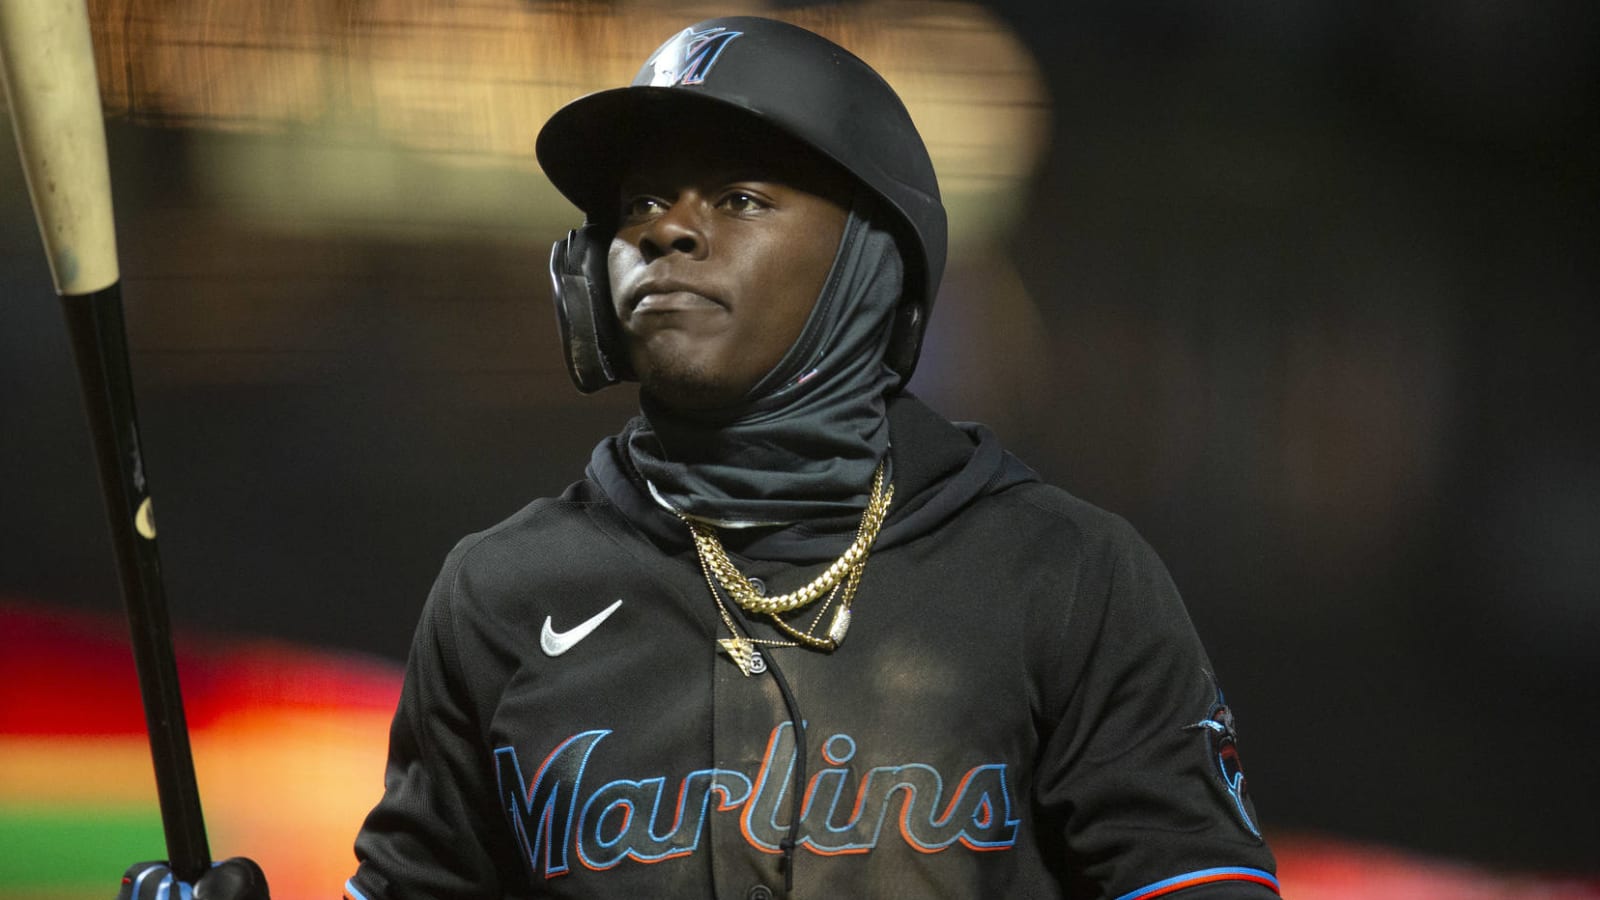 Do I Look Like An Actual Cleanup Hitter - Jazz Chisholm To Marlins Fans  Complaining About Him Bunting